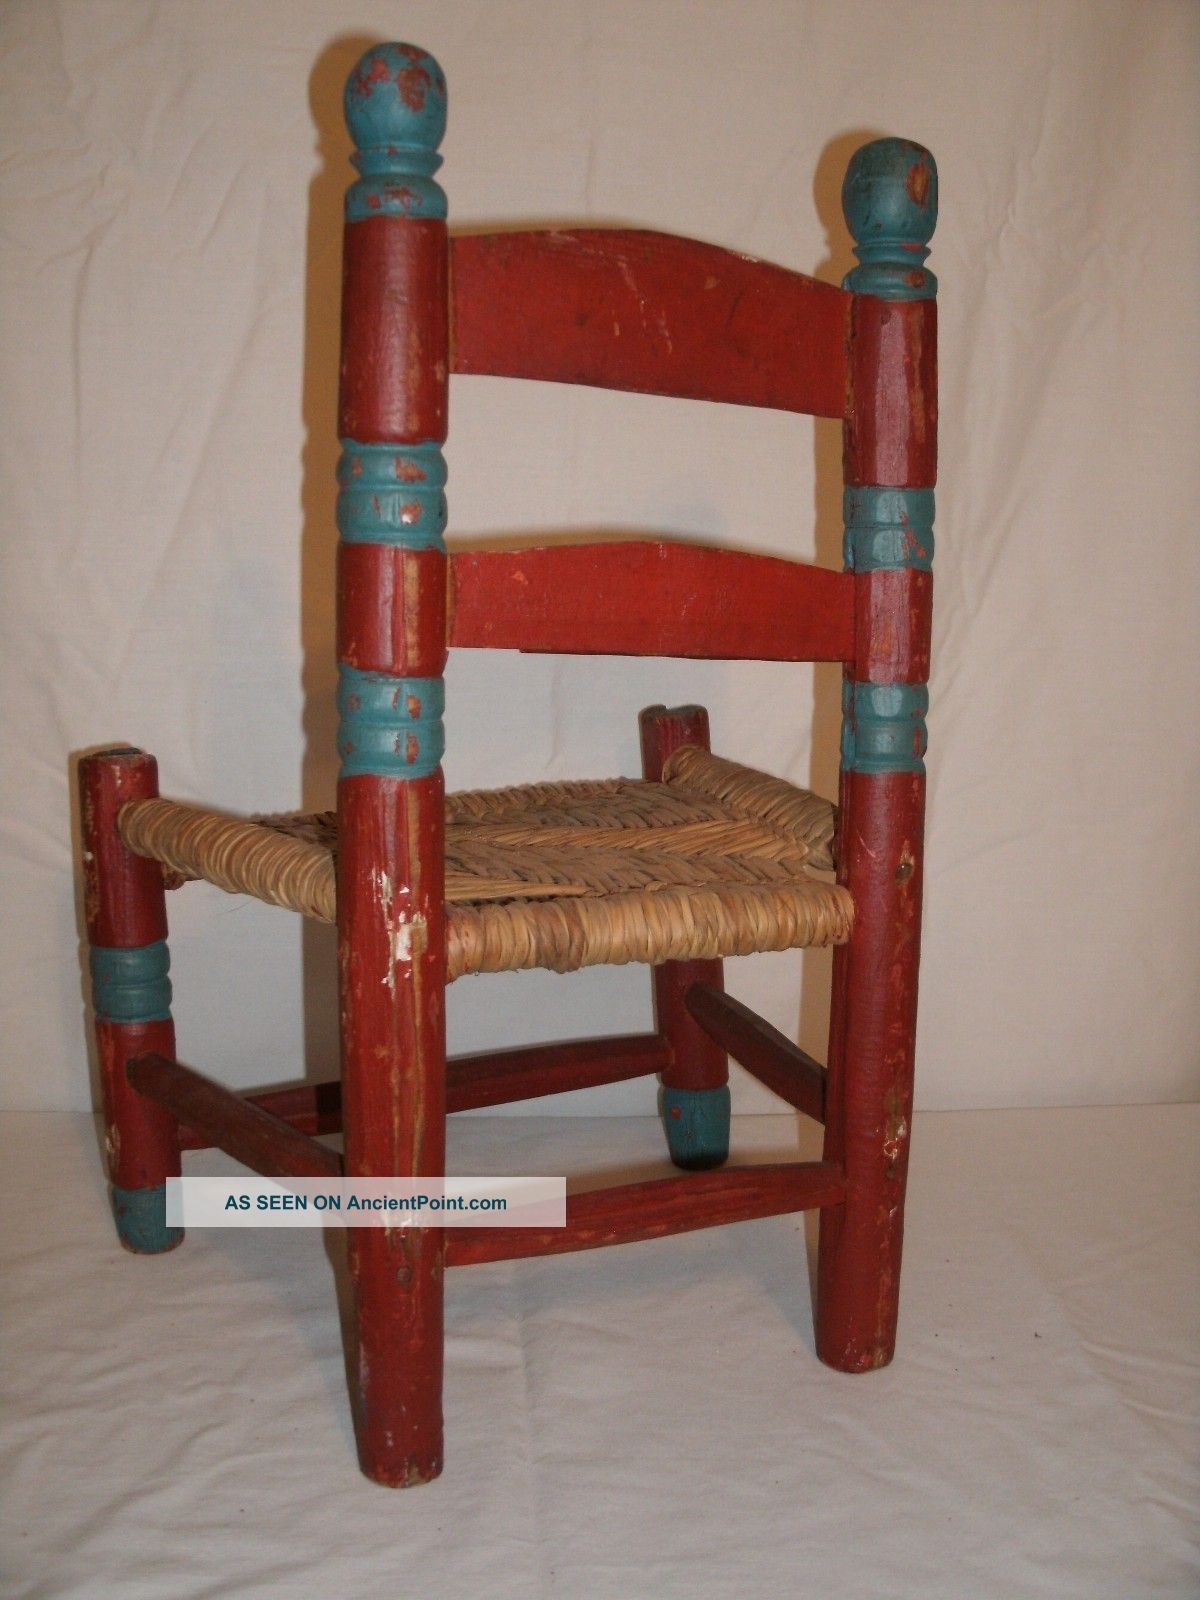 Vintage Mexican Hand Painted Red Teal Wood Childs Chair